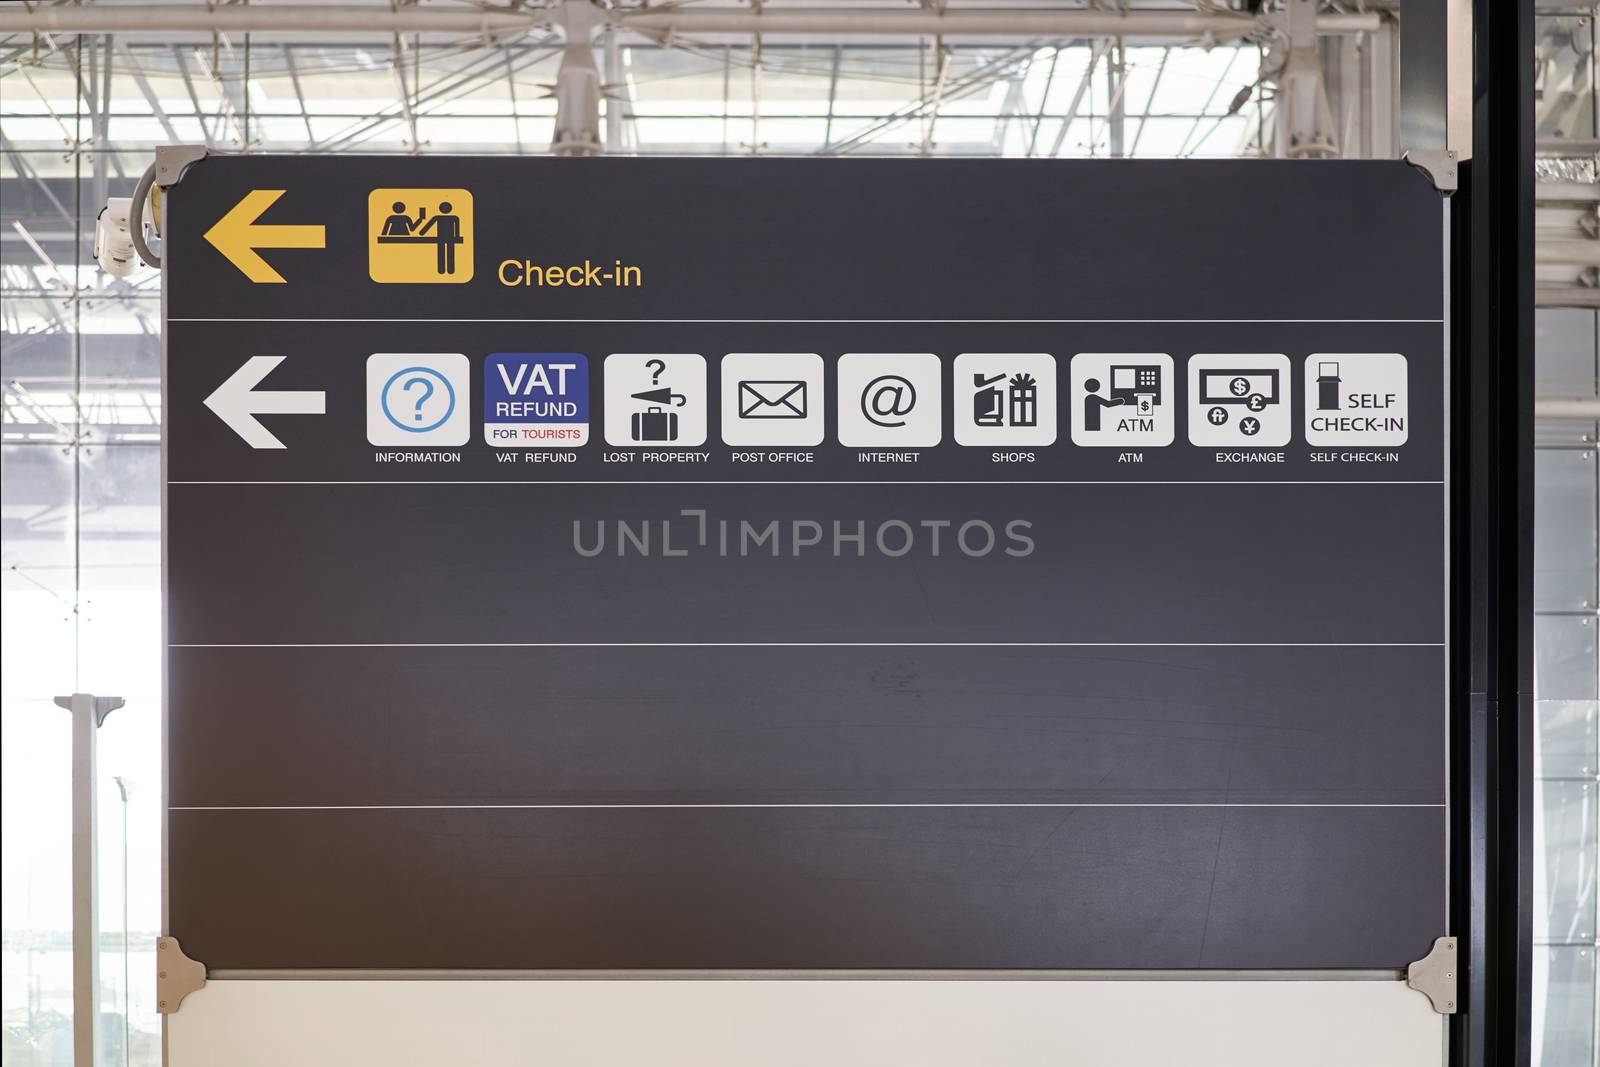 Check in and service guide information board sign with yellow and white character on black background at international airport terminal.